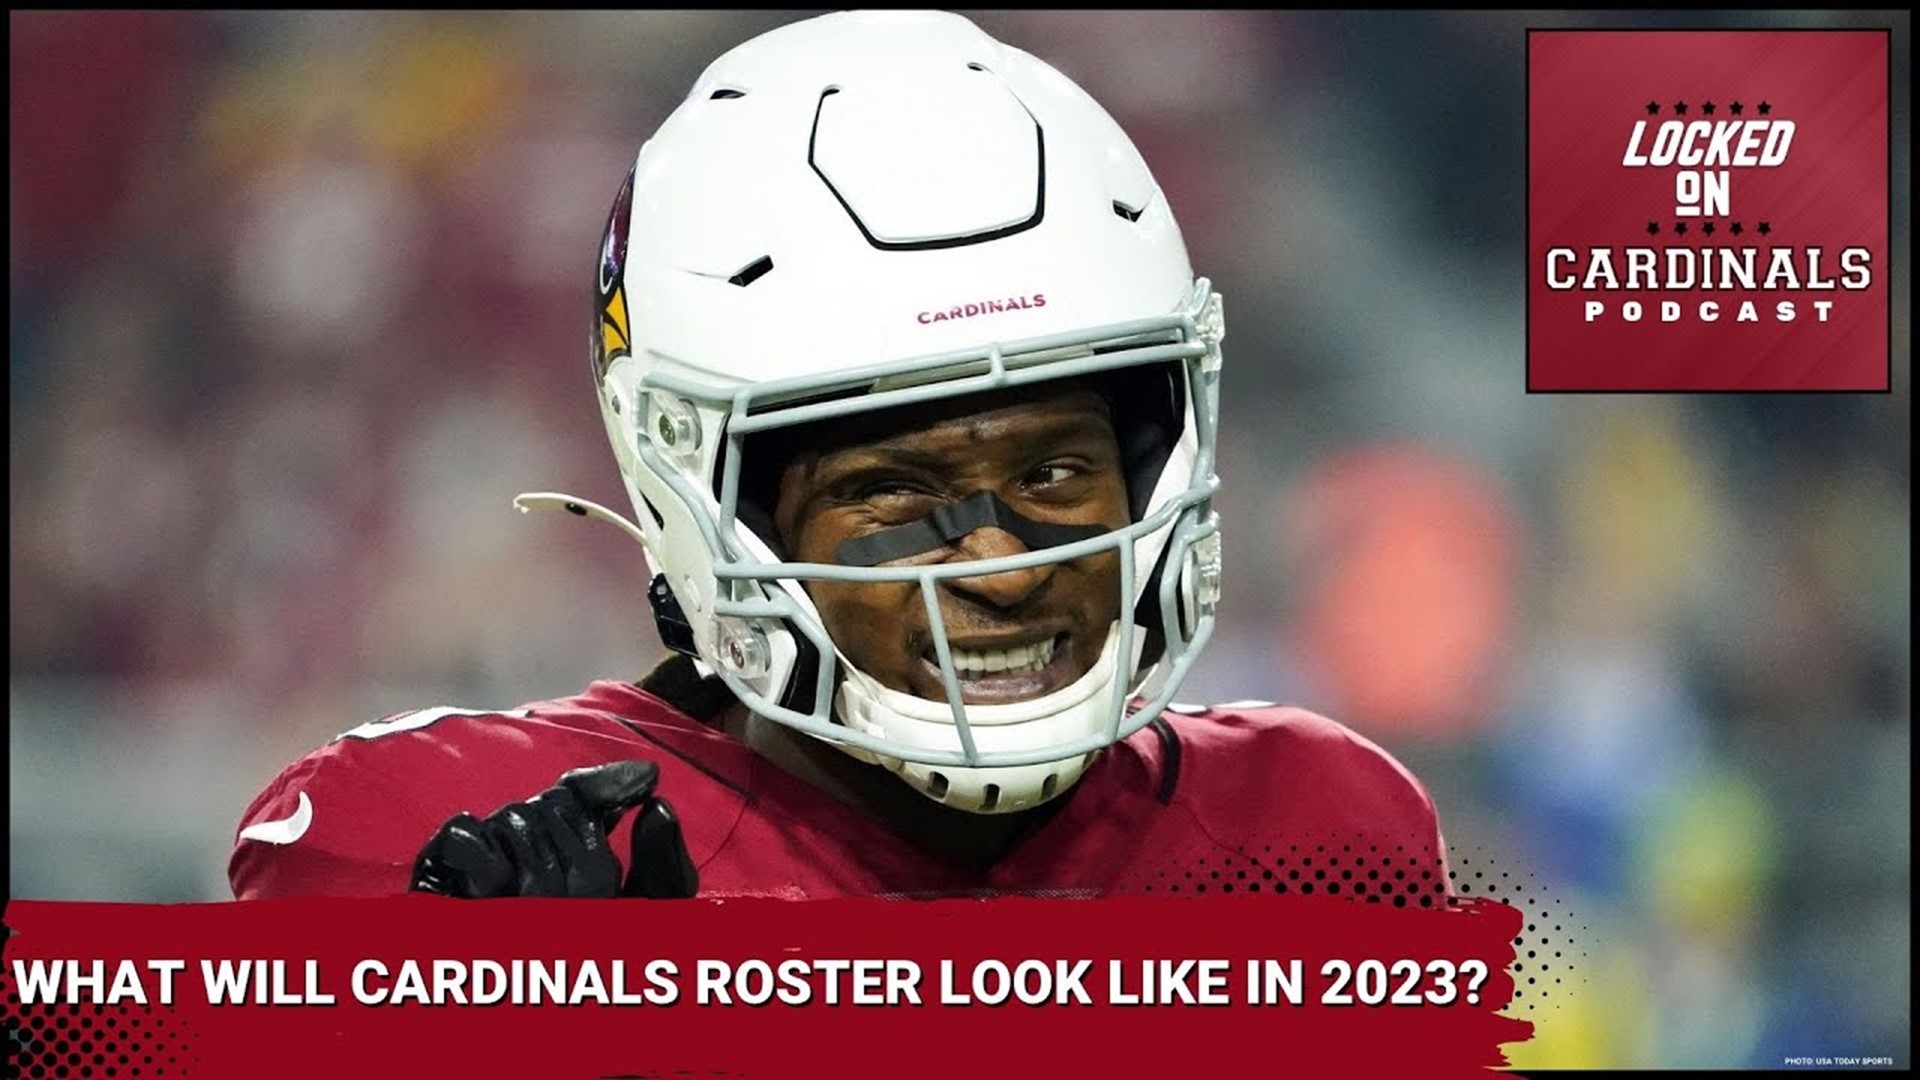 Arizona Cardinals are going to be going through some transition and growing pains during 2023.